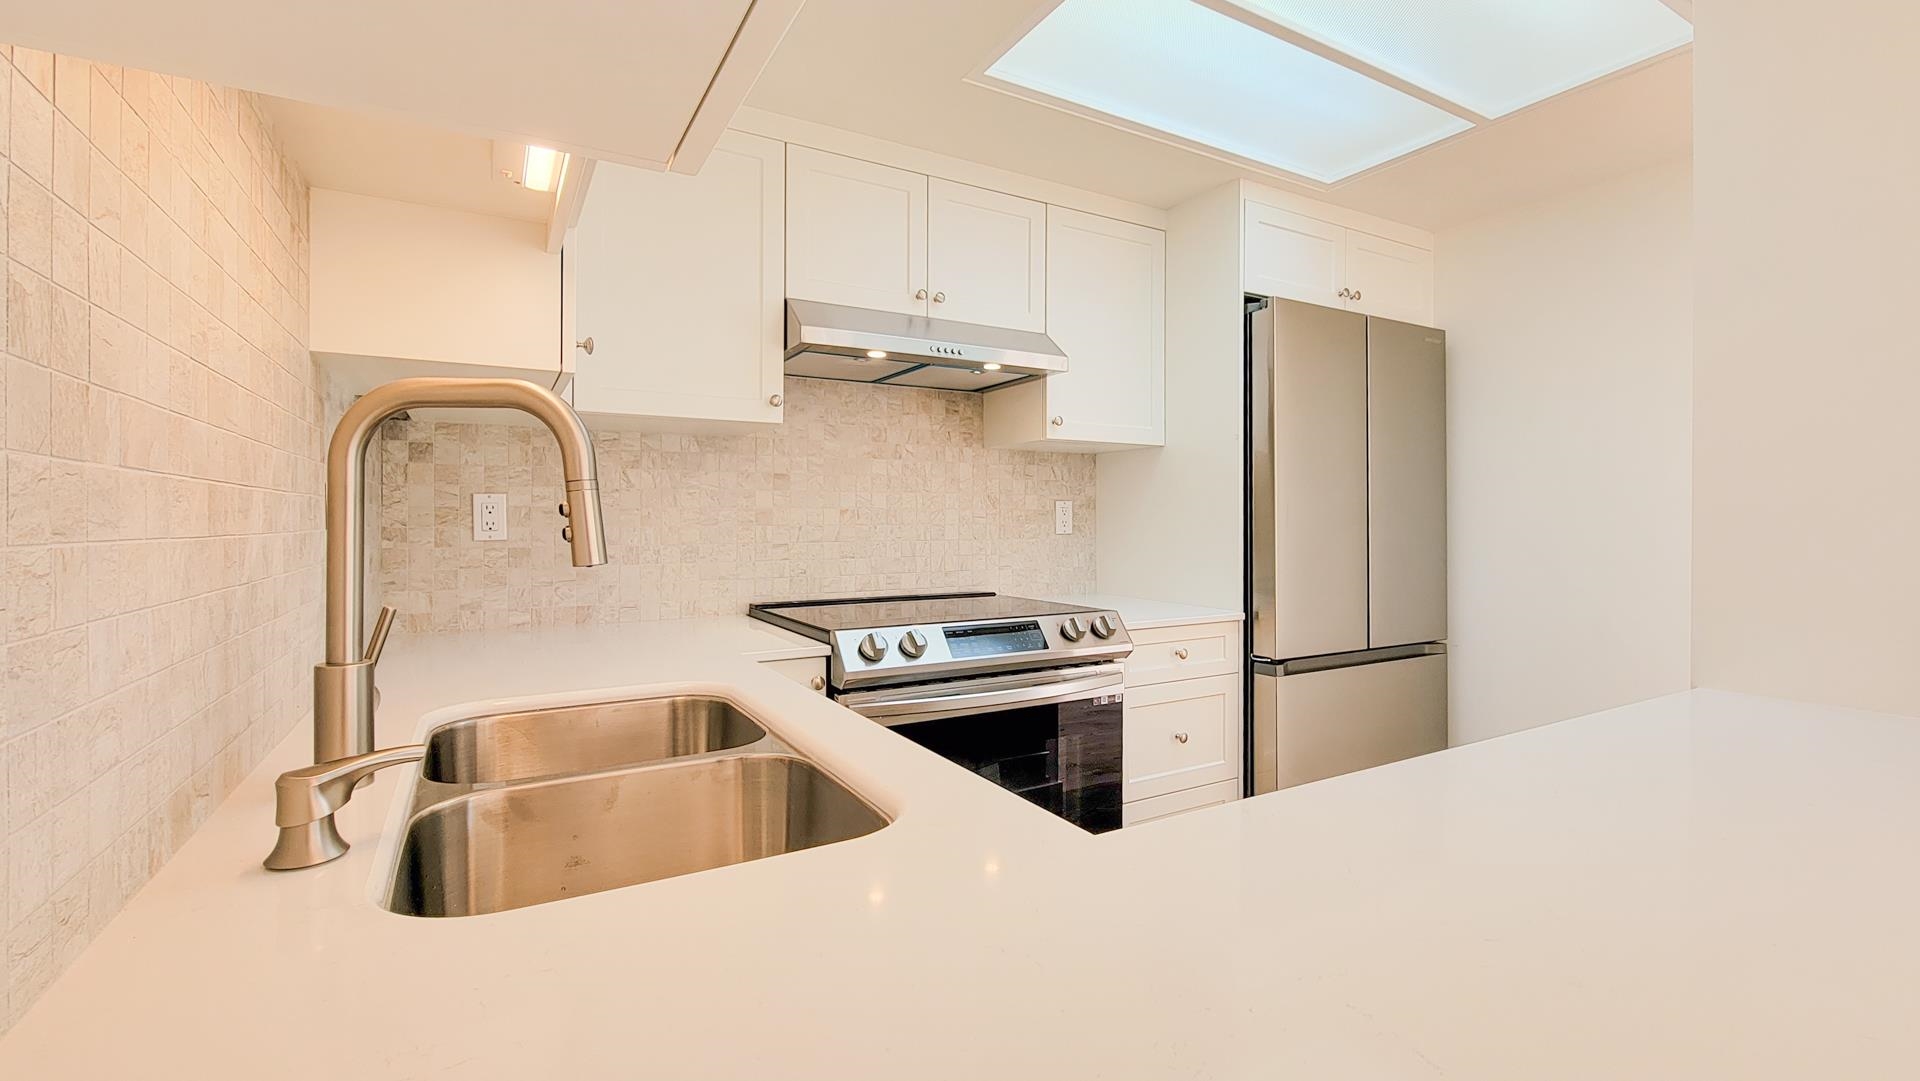 The Silestone counters are white with traces of grey which enhance the tile backsplash which is a mixture of greys.